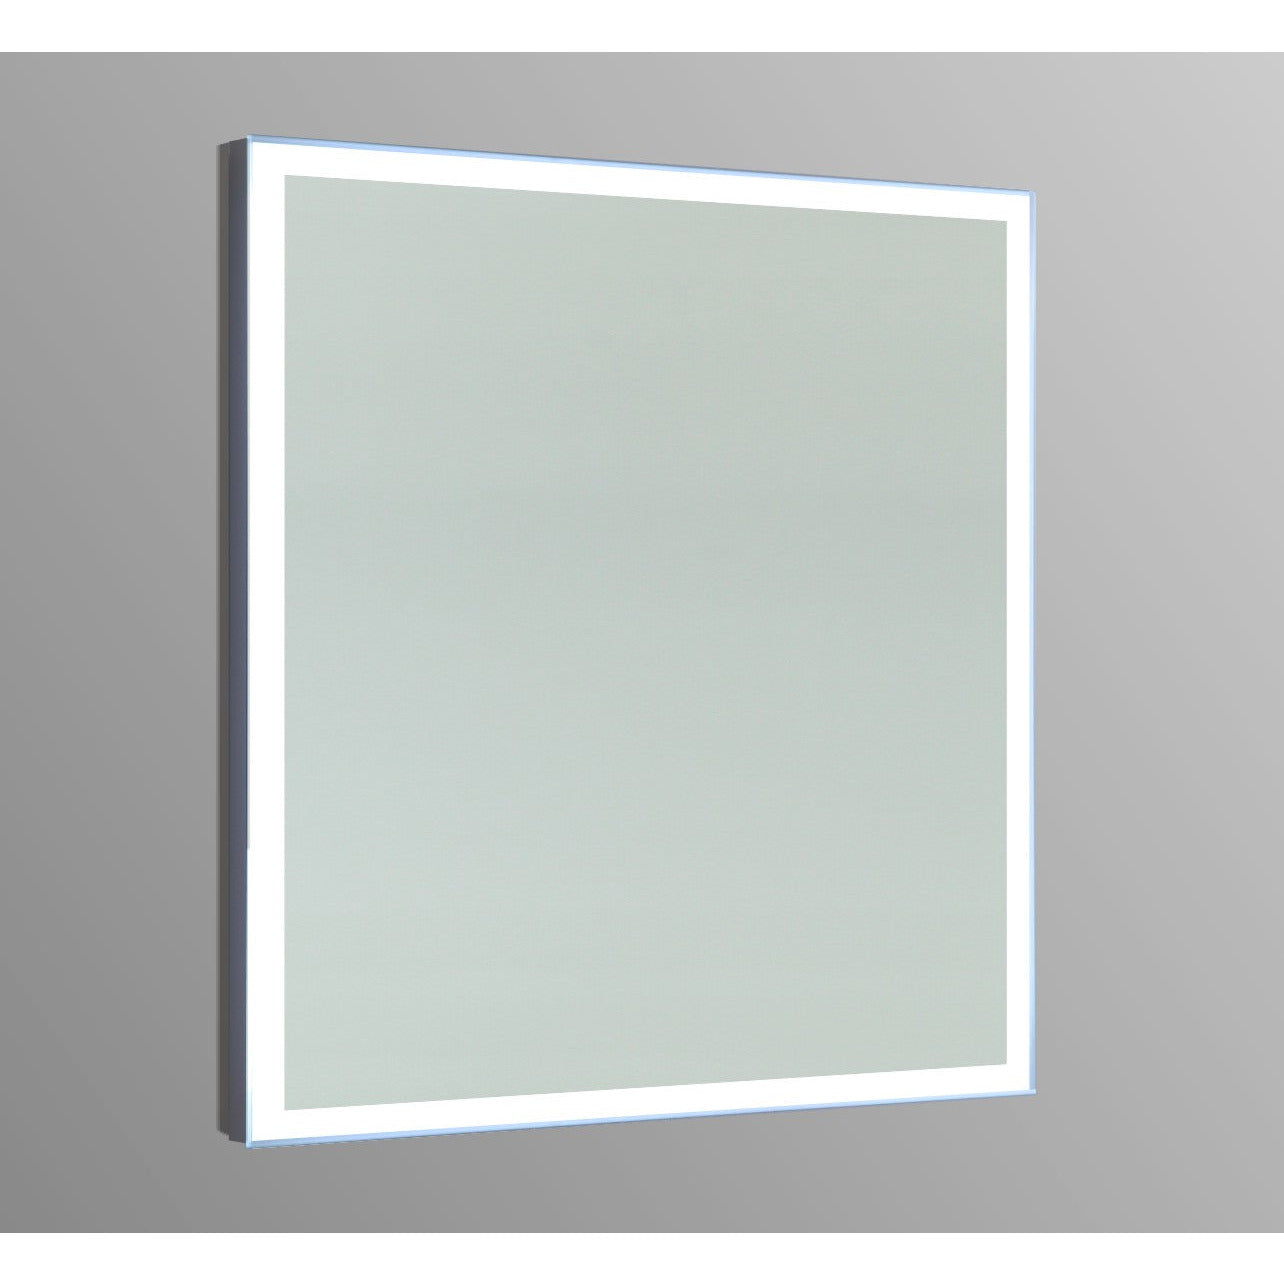 Vanity Art Led Mirror with White and Blue Color + Touch Sensor - VA3D-24